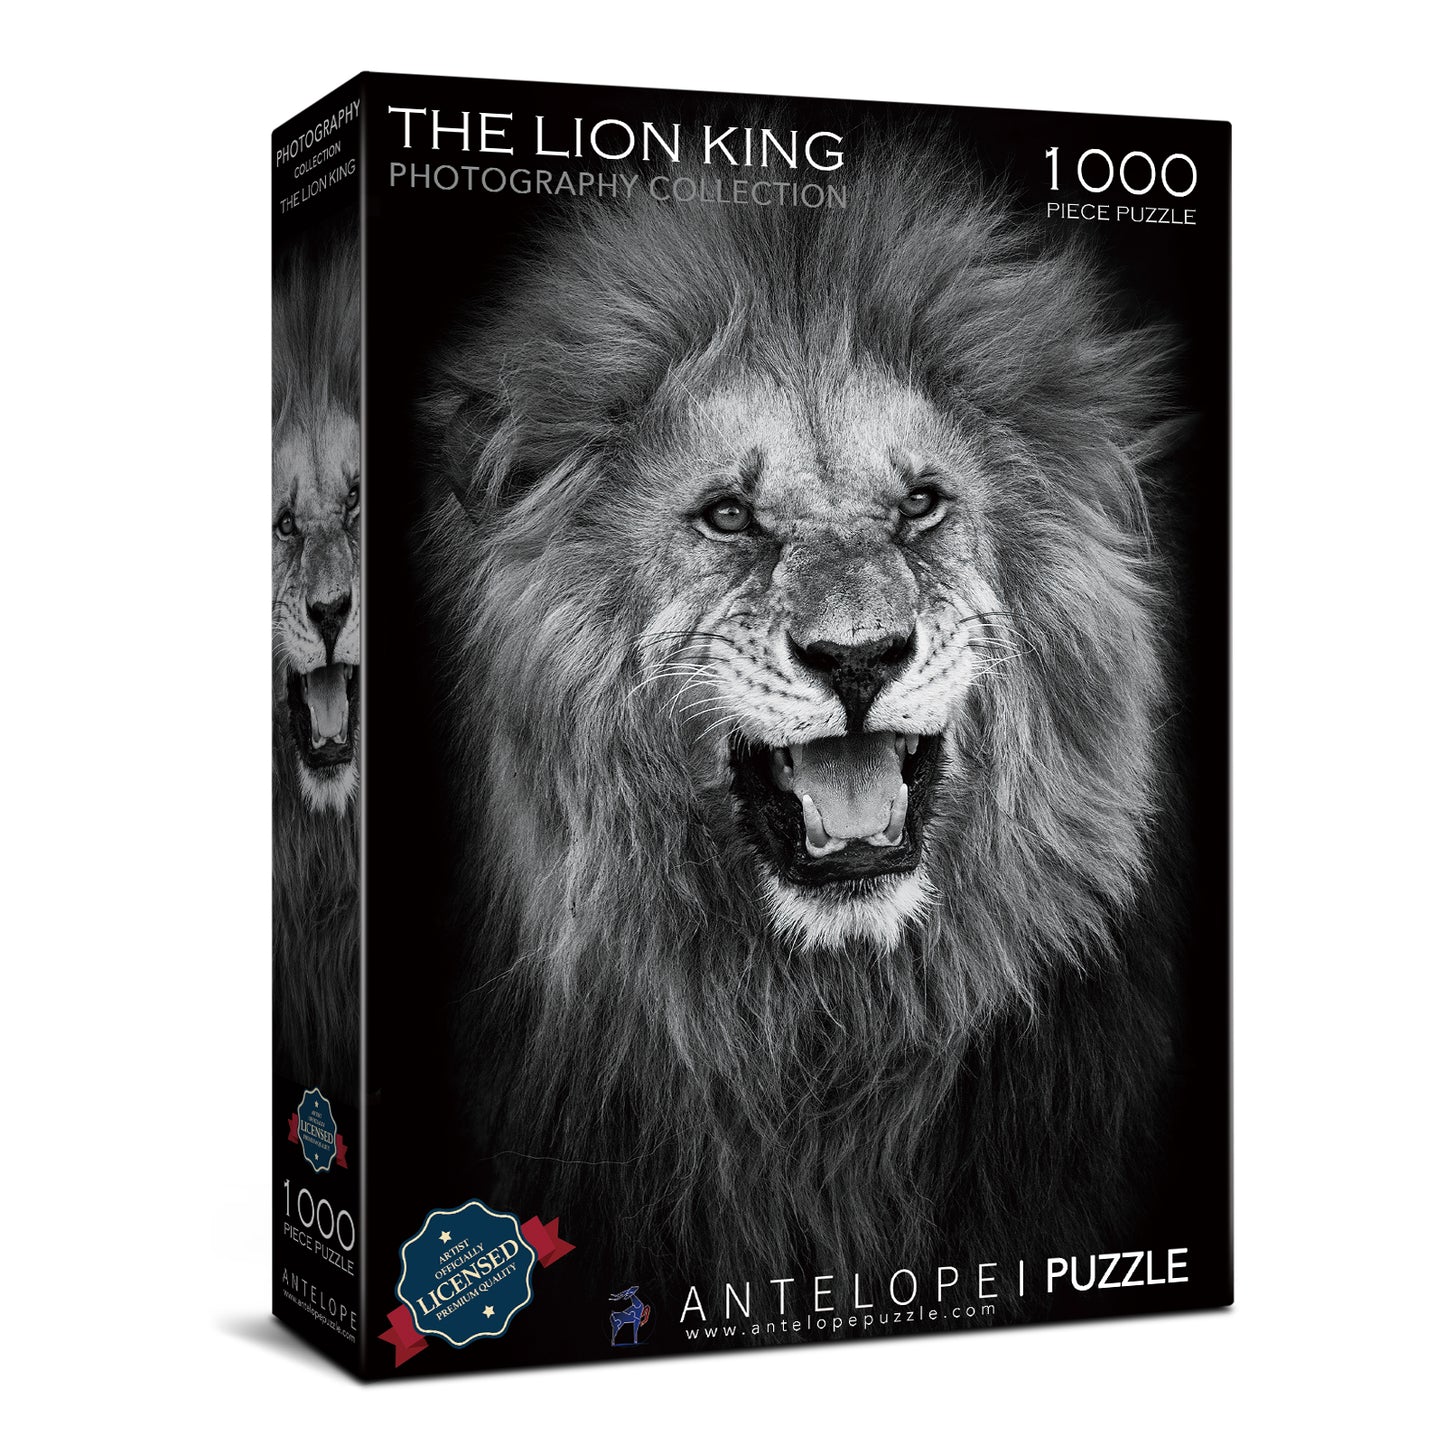 The Lion King 1000 Piece Jigsaw Puzzle